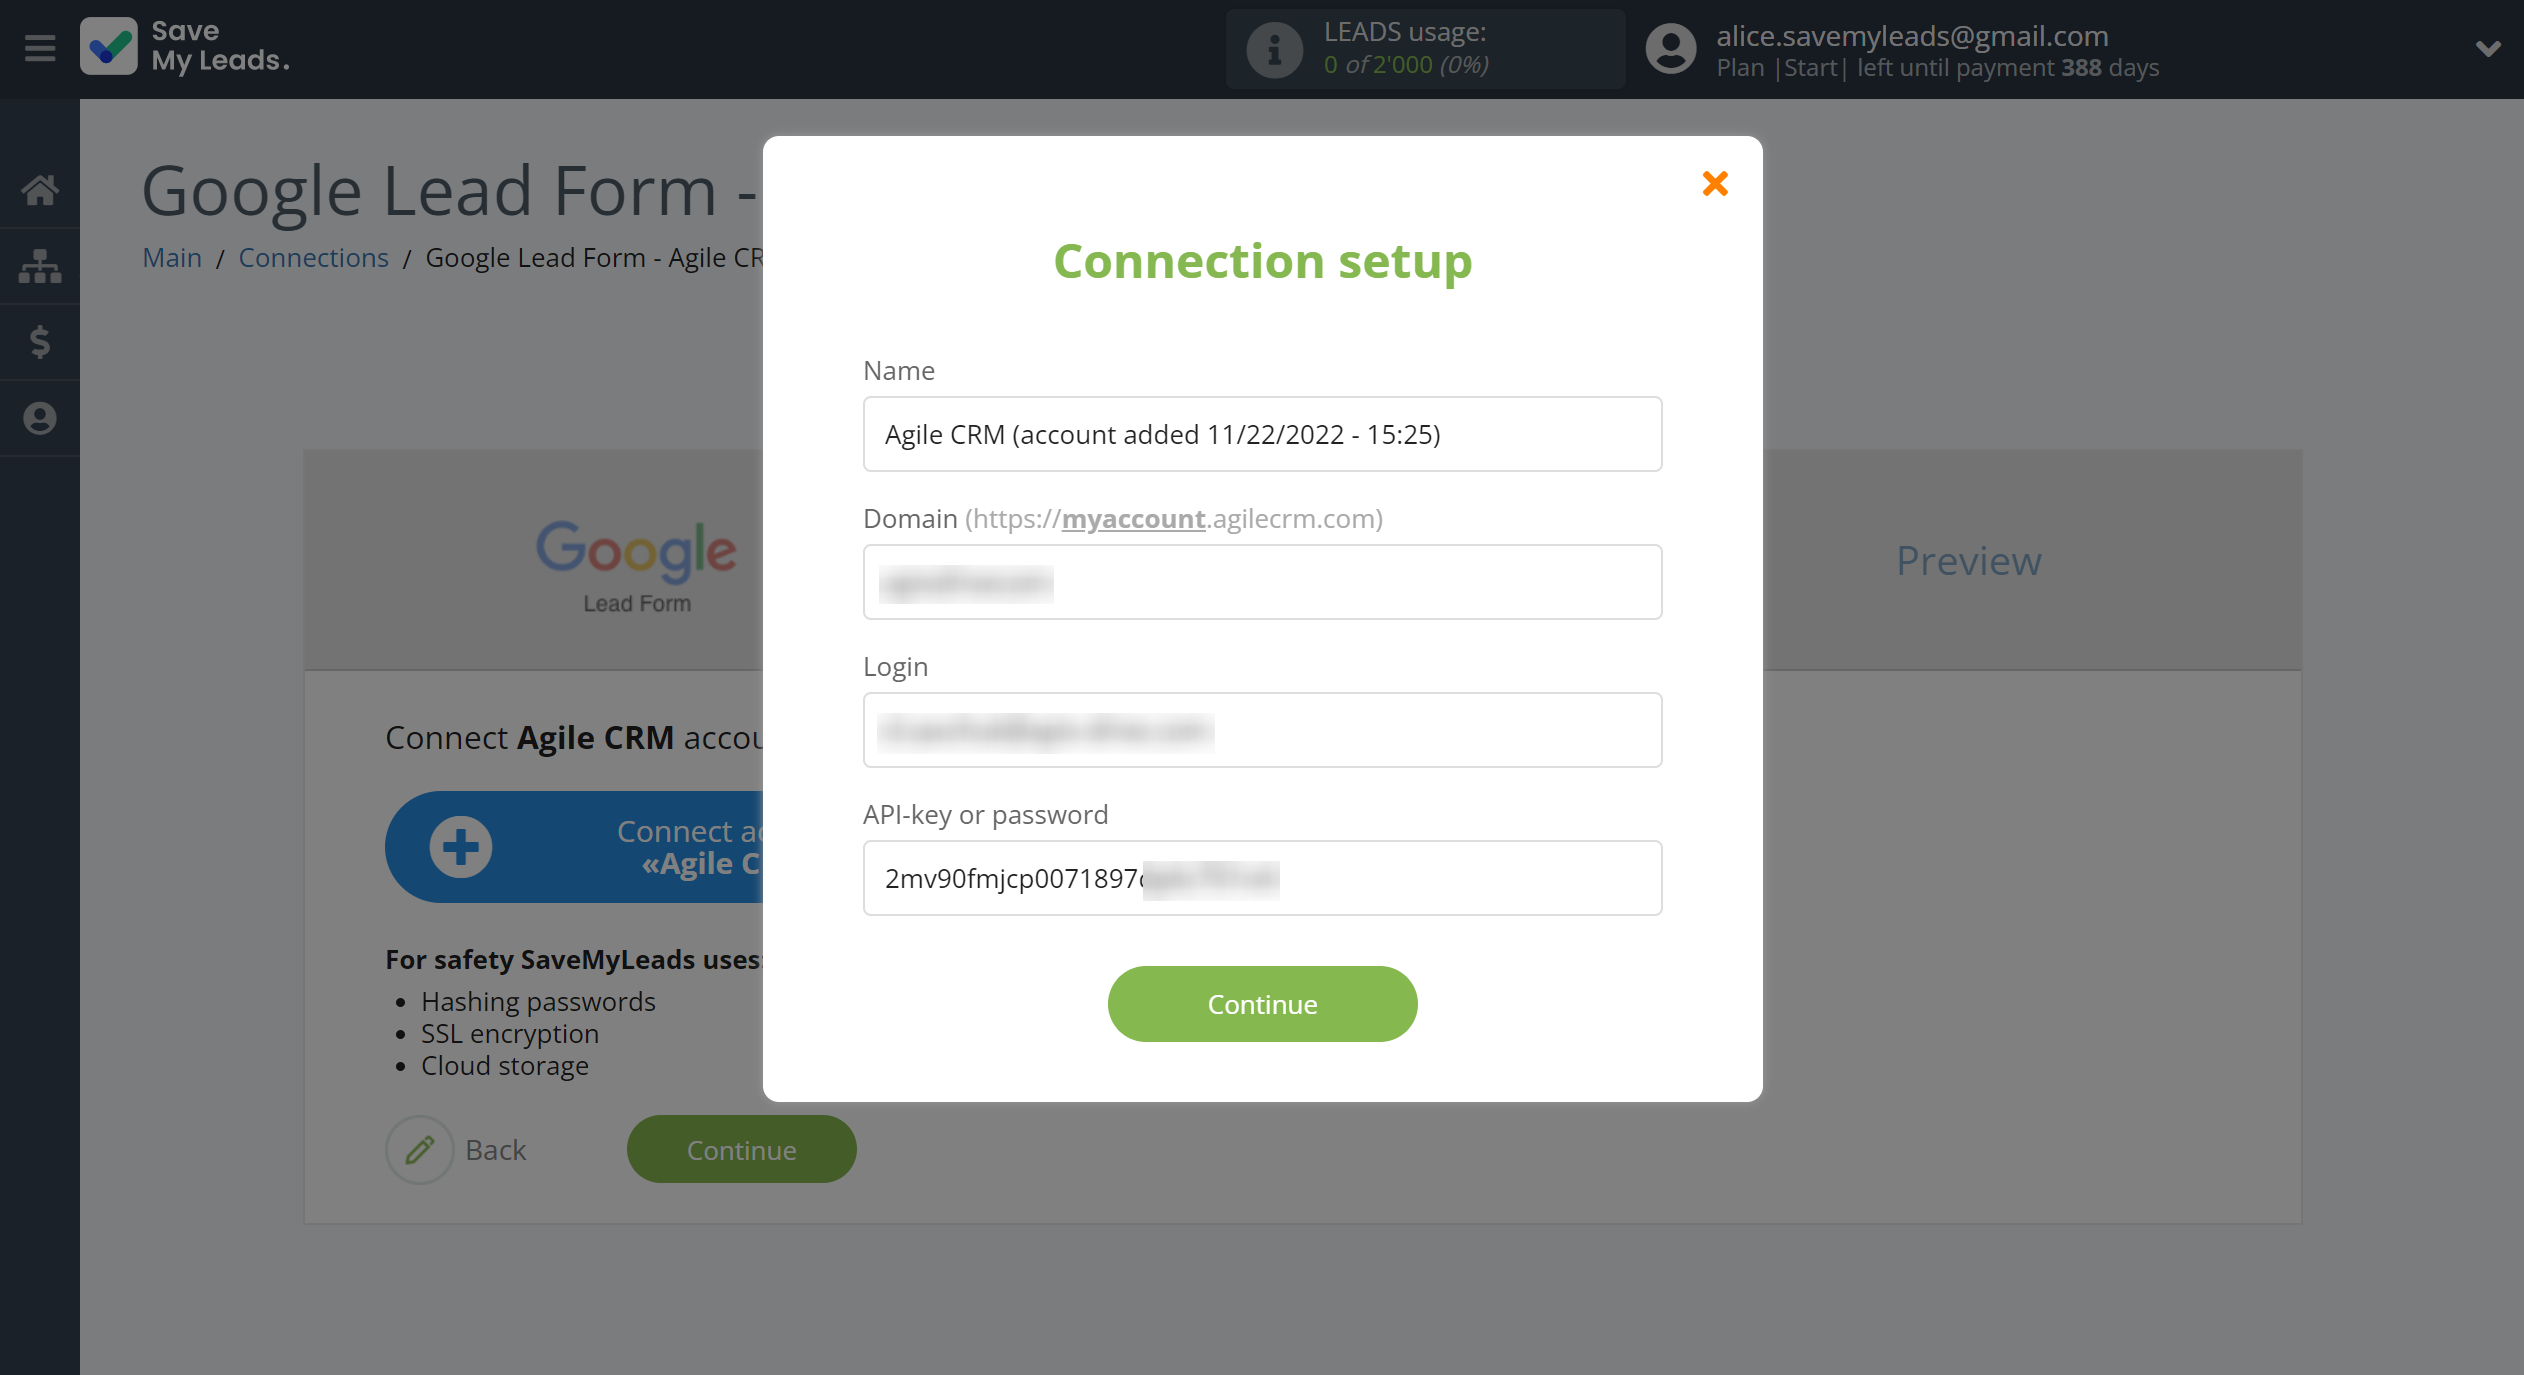 How to Connect Google Lead Form with AgileCRM Create Contacts | Data Destination account connection